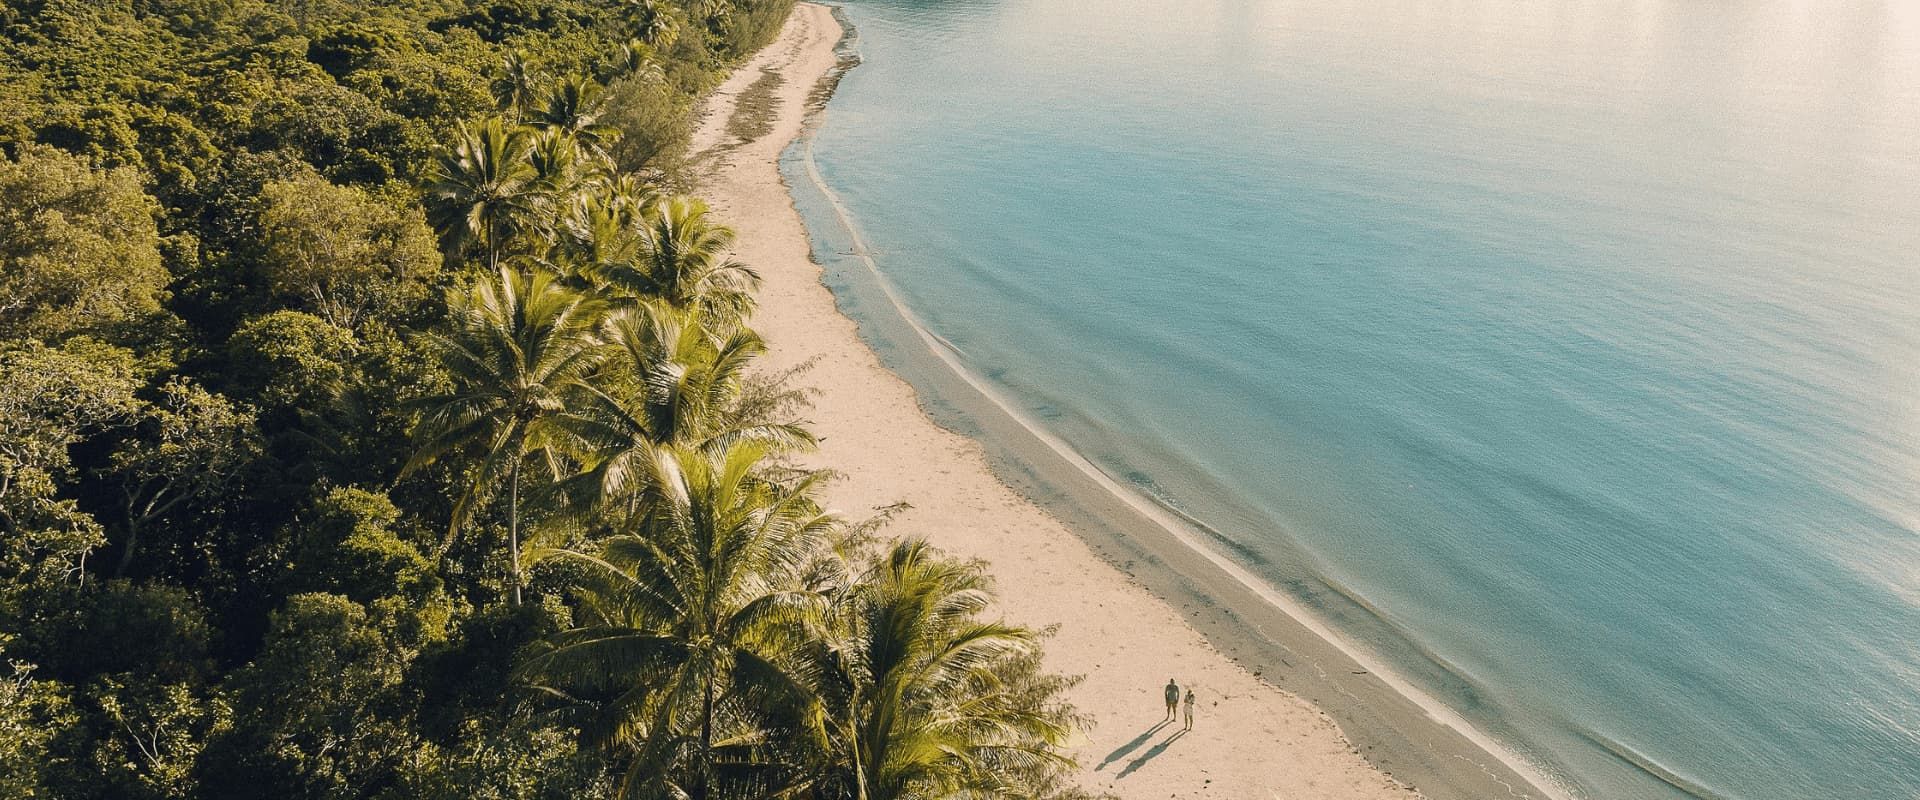 Drone Shot Of Couple Walking On Sandy Beach Next To Lush Tropical Rainforest